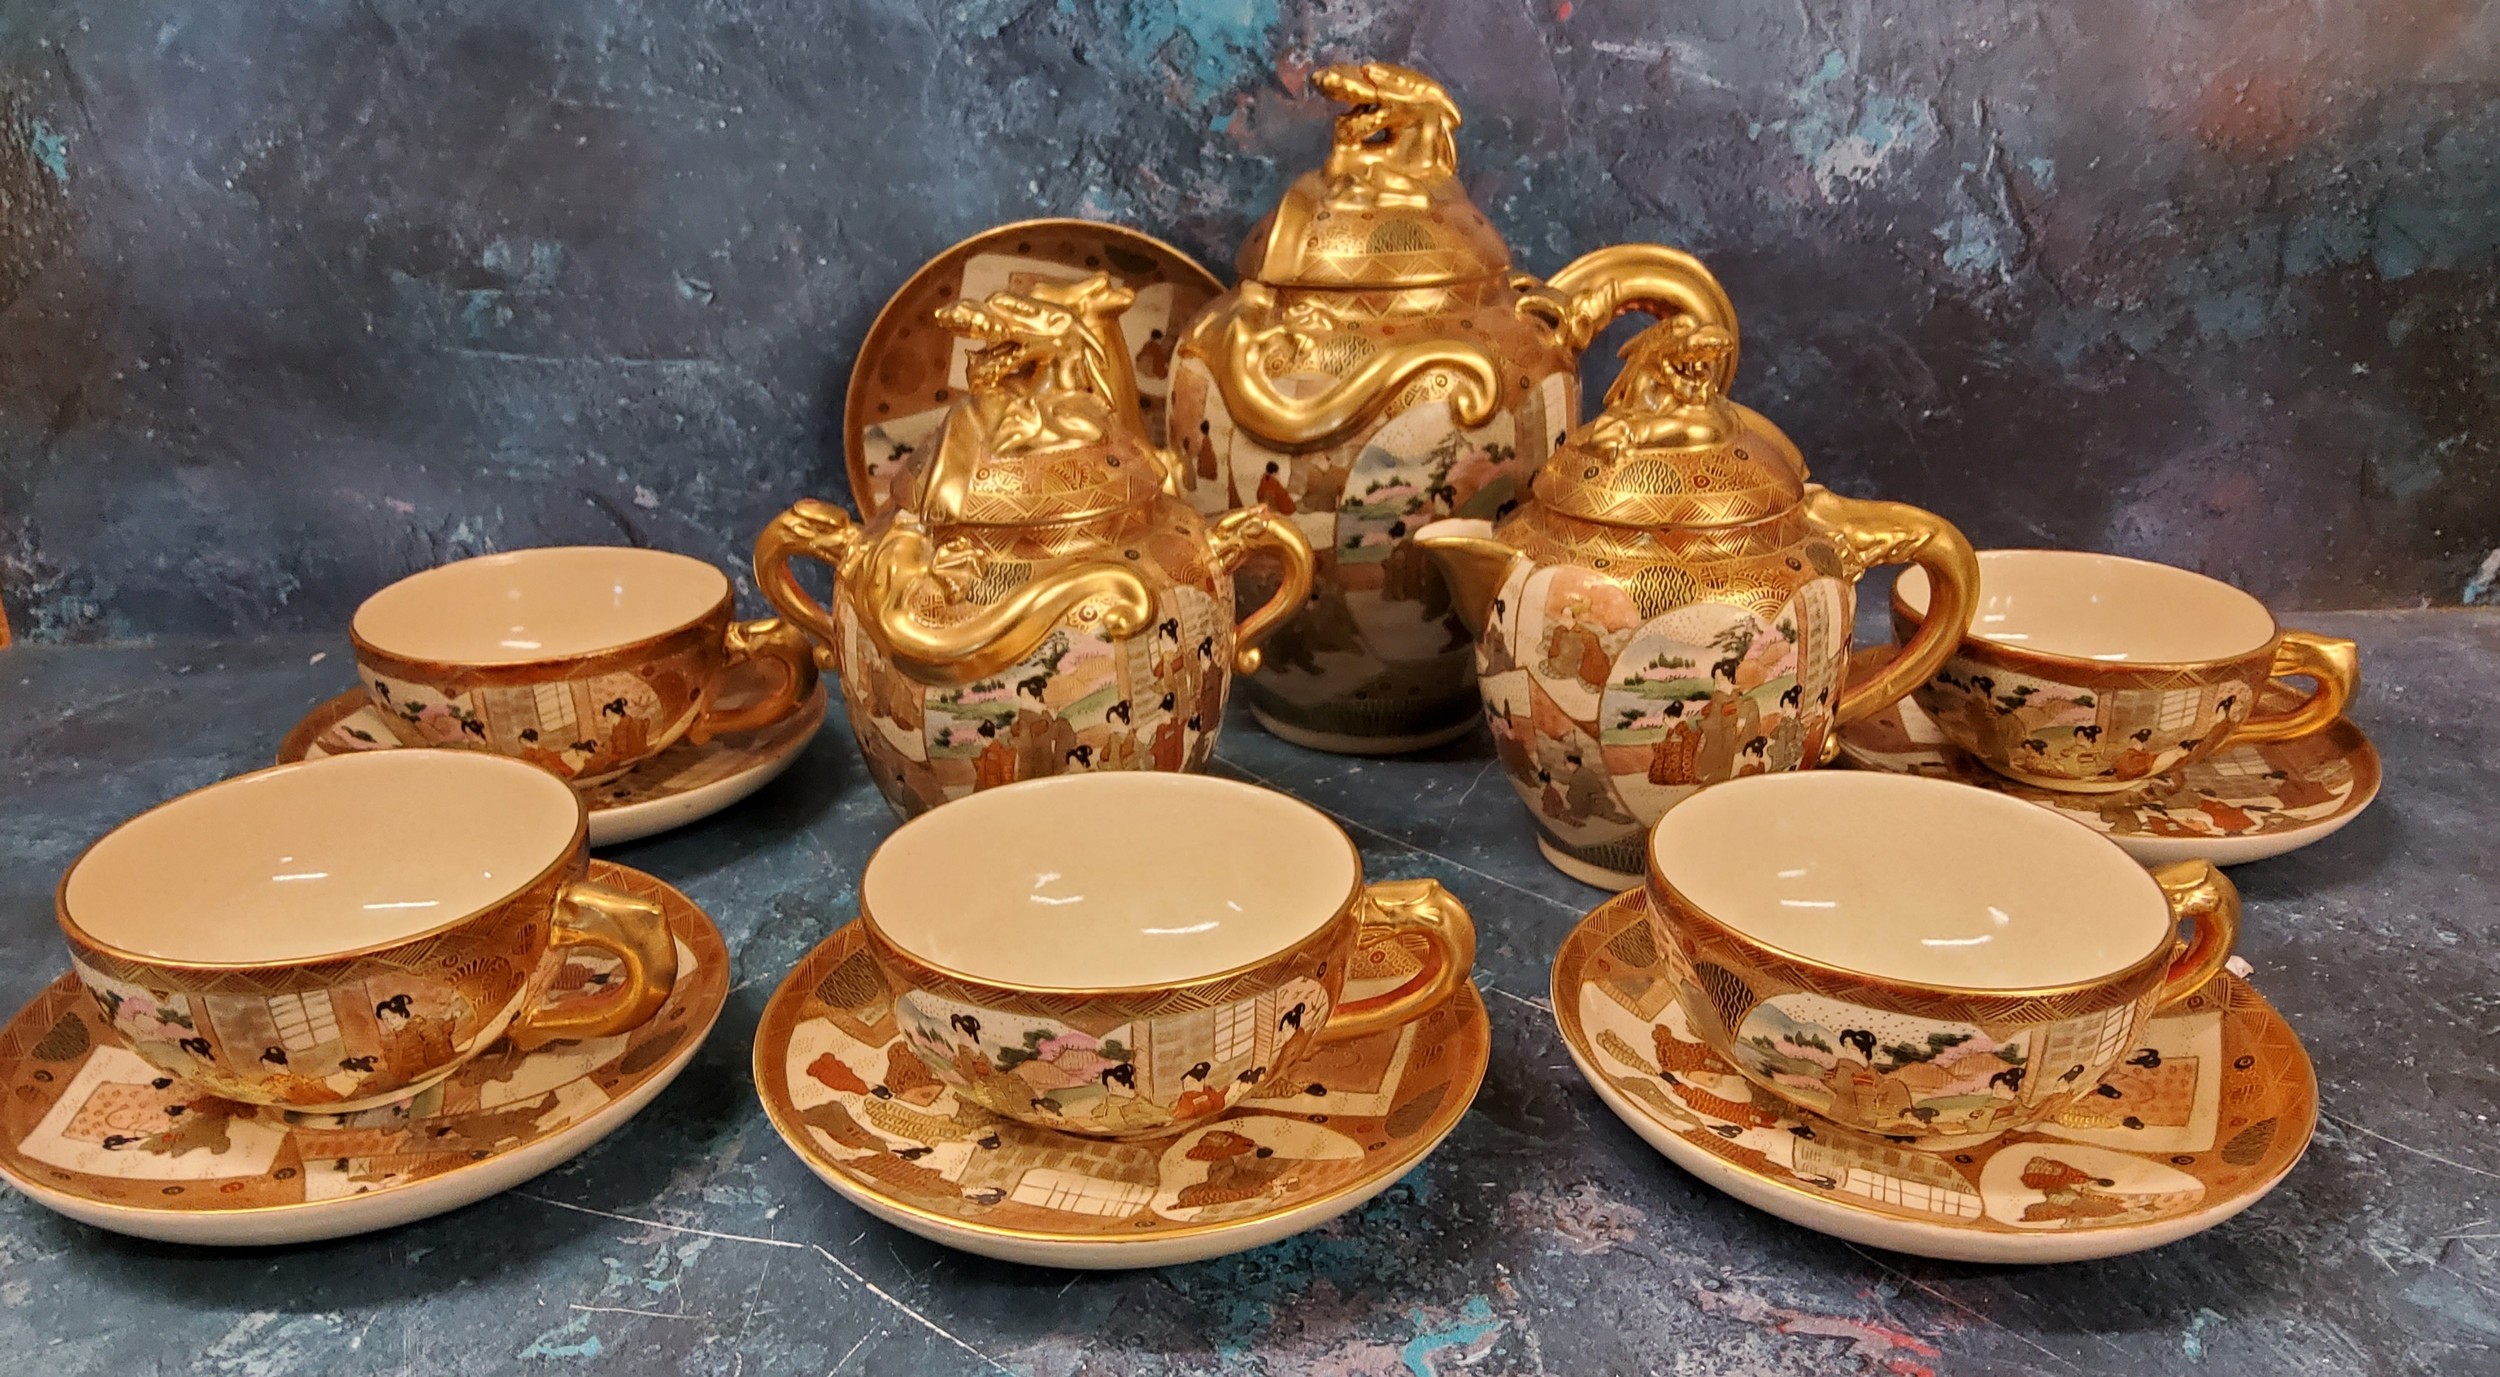 A Japanese satsuma tea service, each typically decorated in with ladies on panels, gilt dragon